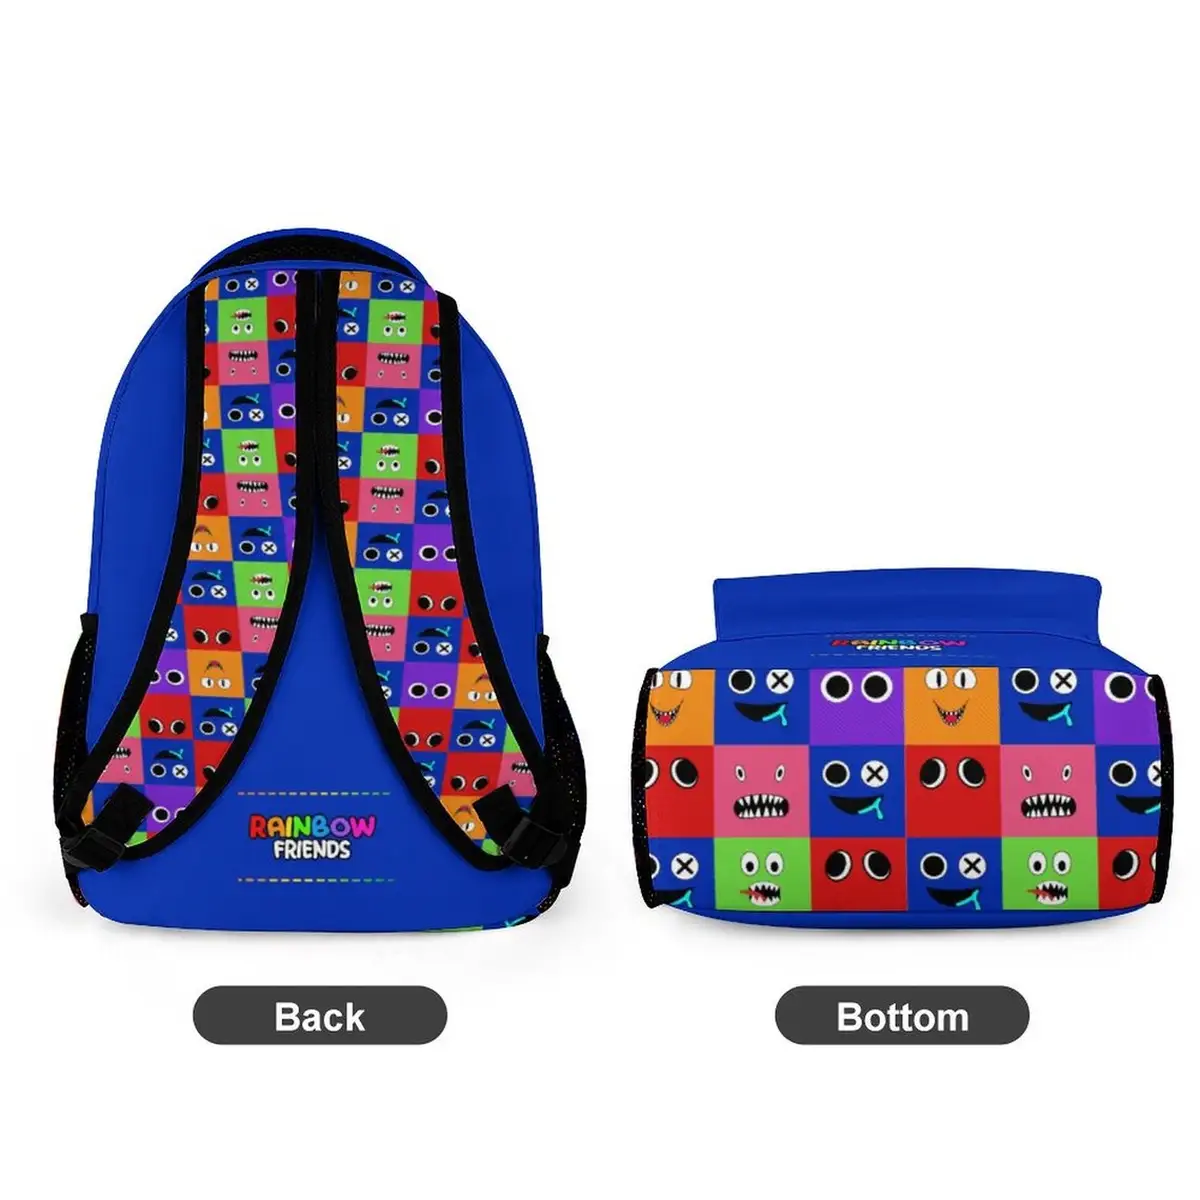 Blue Rainbow Friends backpack from BLUE grid characters faces background Cool Kiddo 14